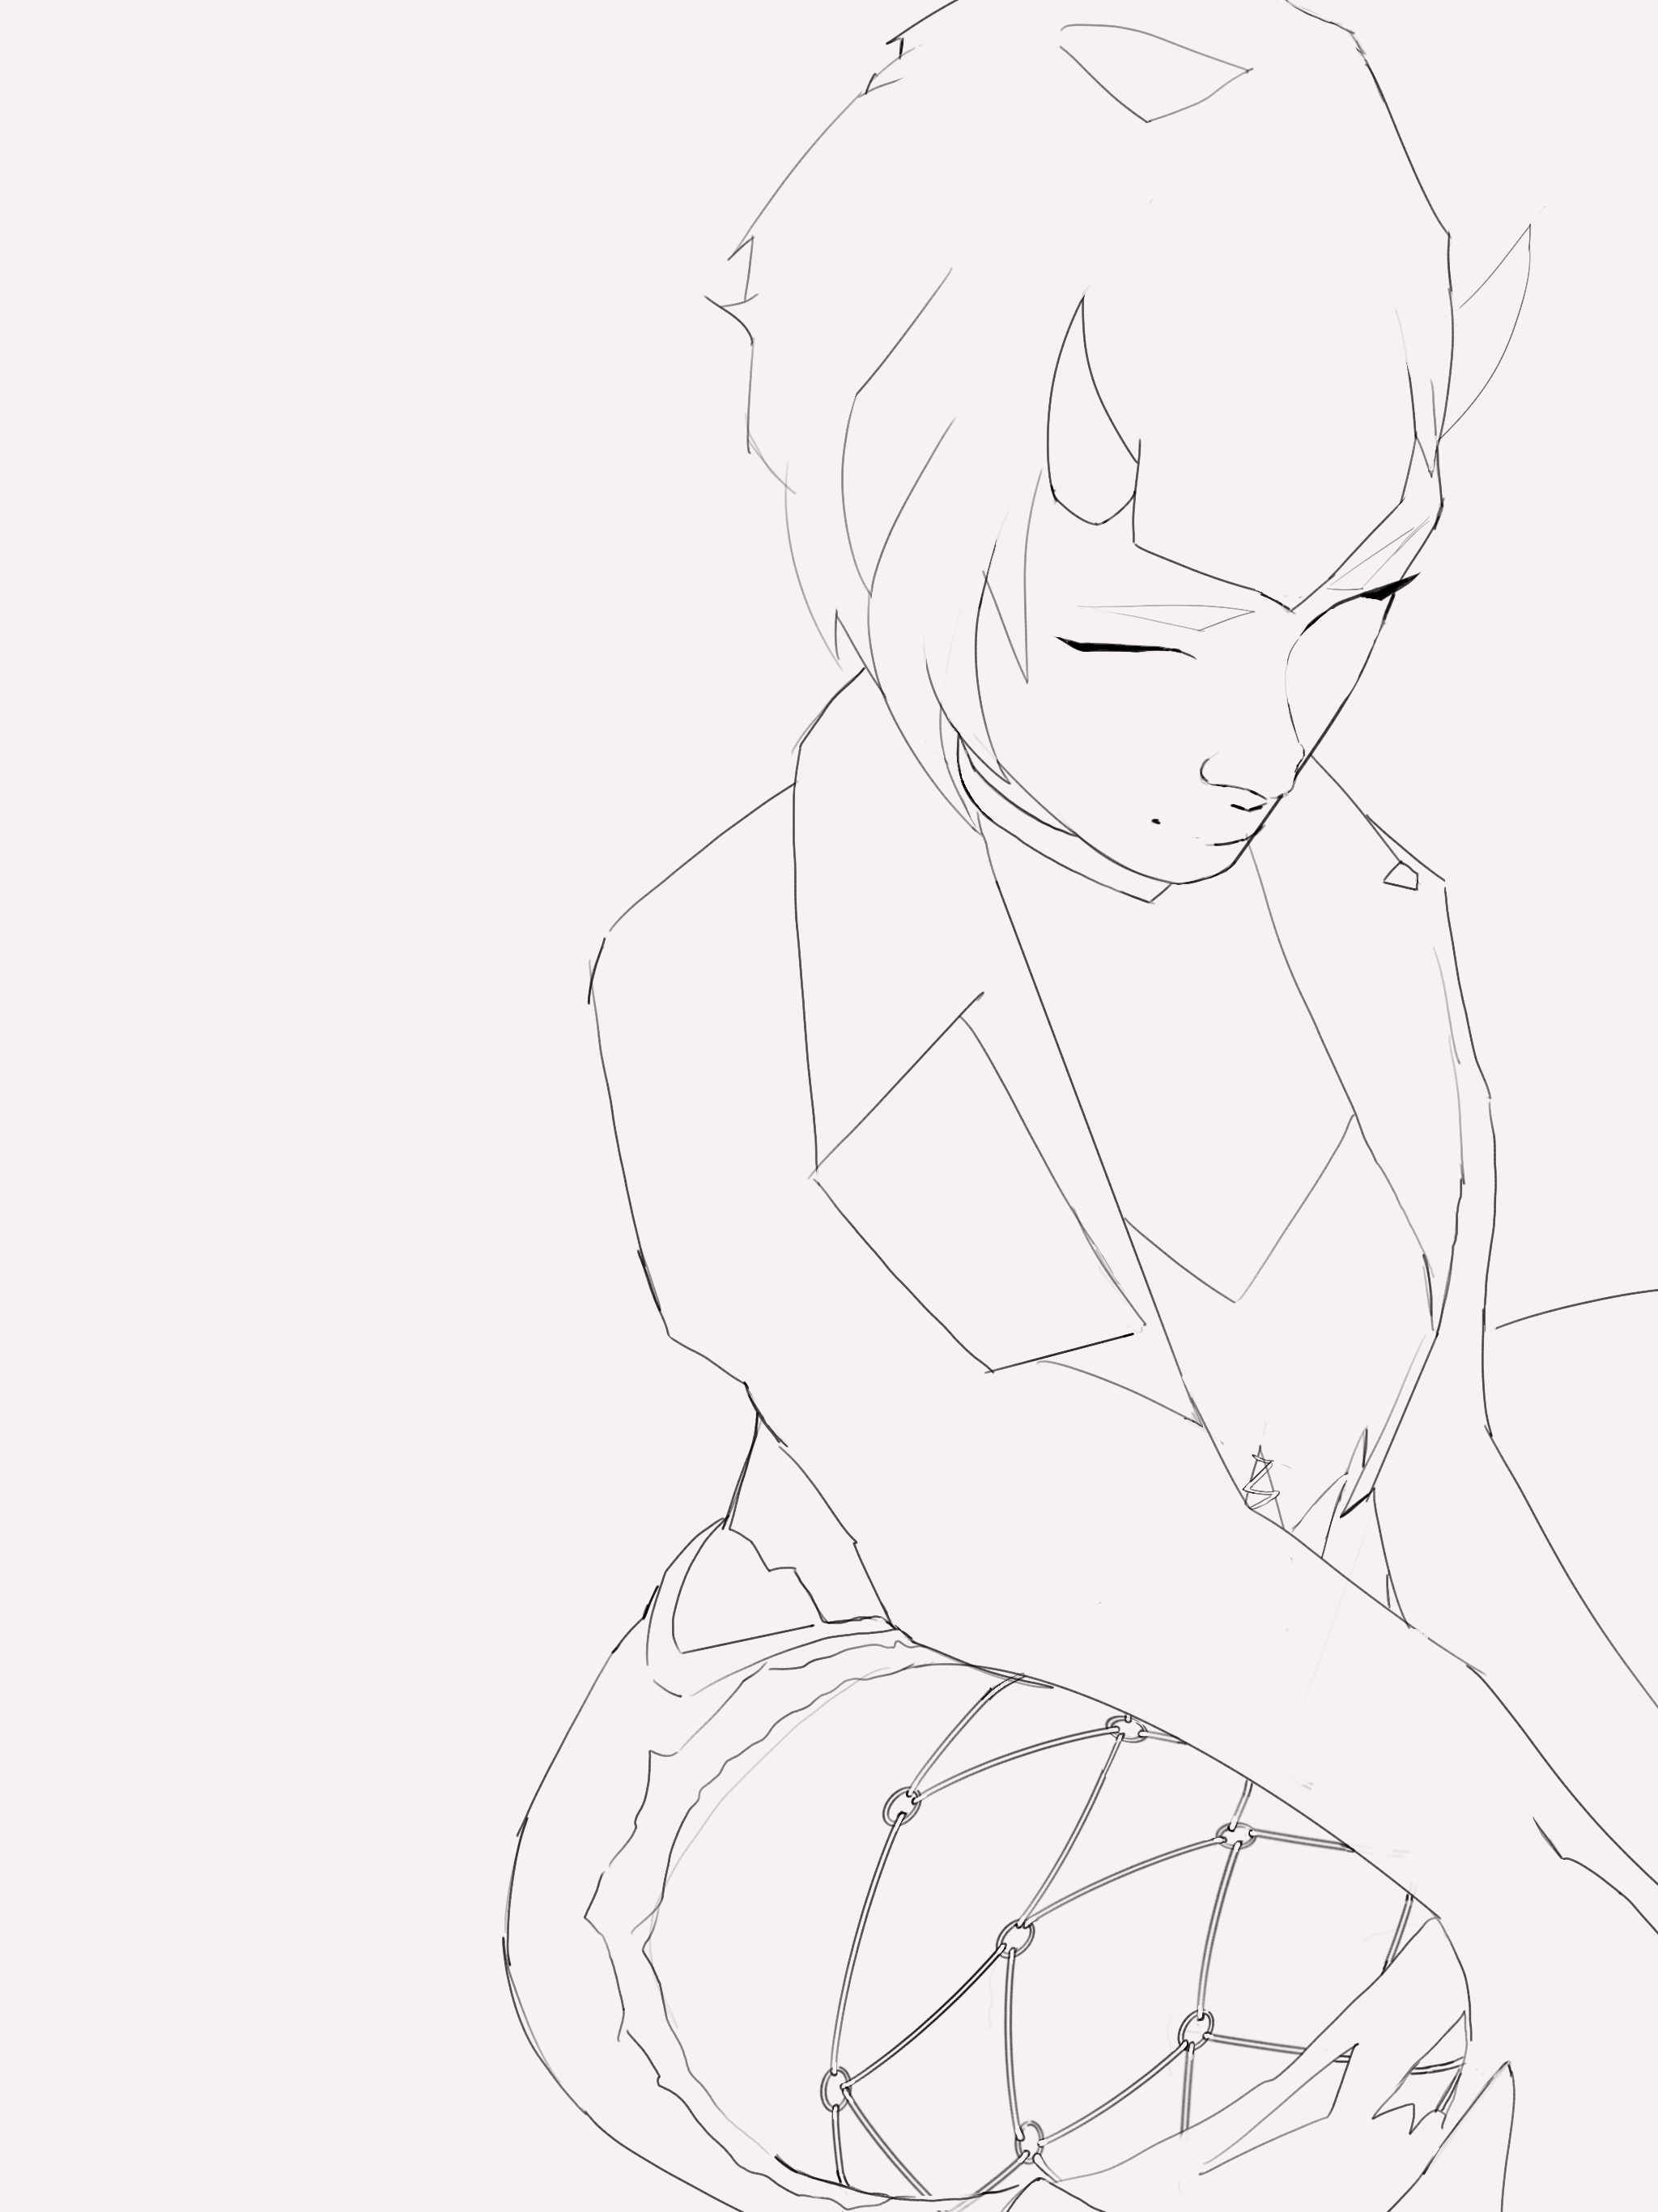  A line art outline of a girl with horns and tail, squatting.